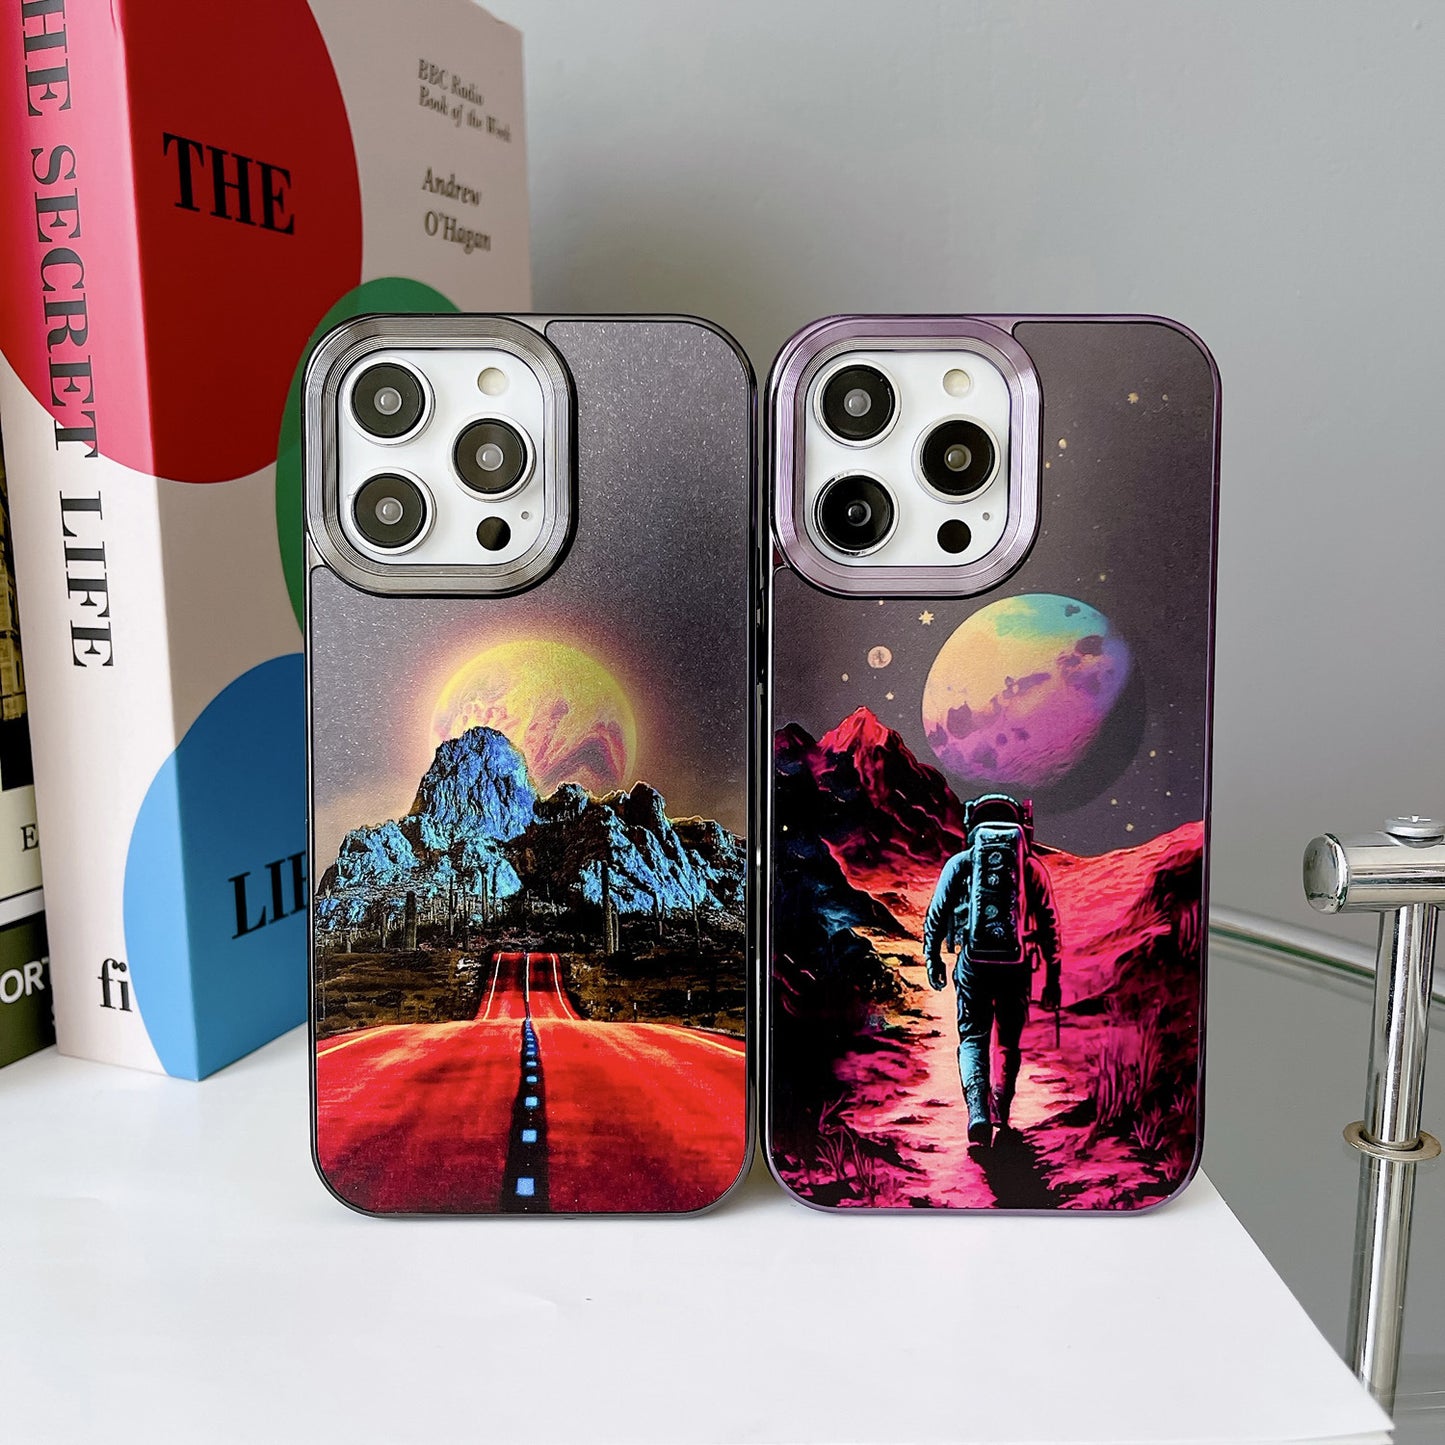 Space Walk & Journey to the moon iPhone case